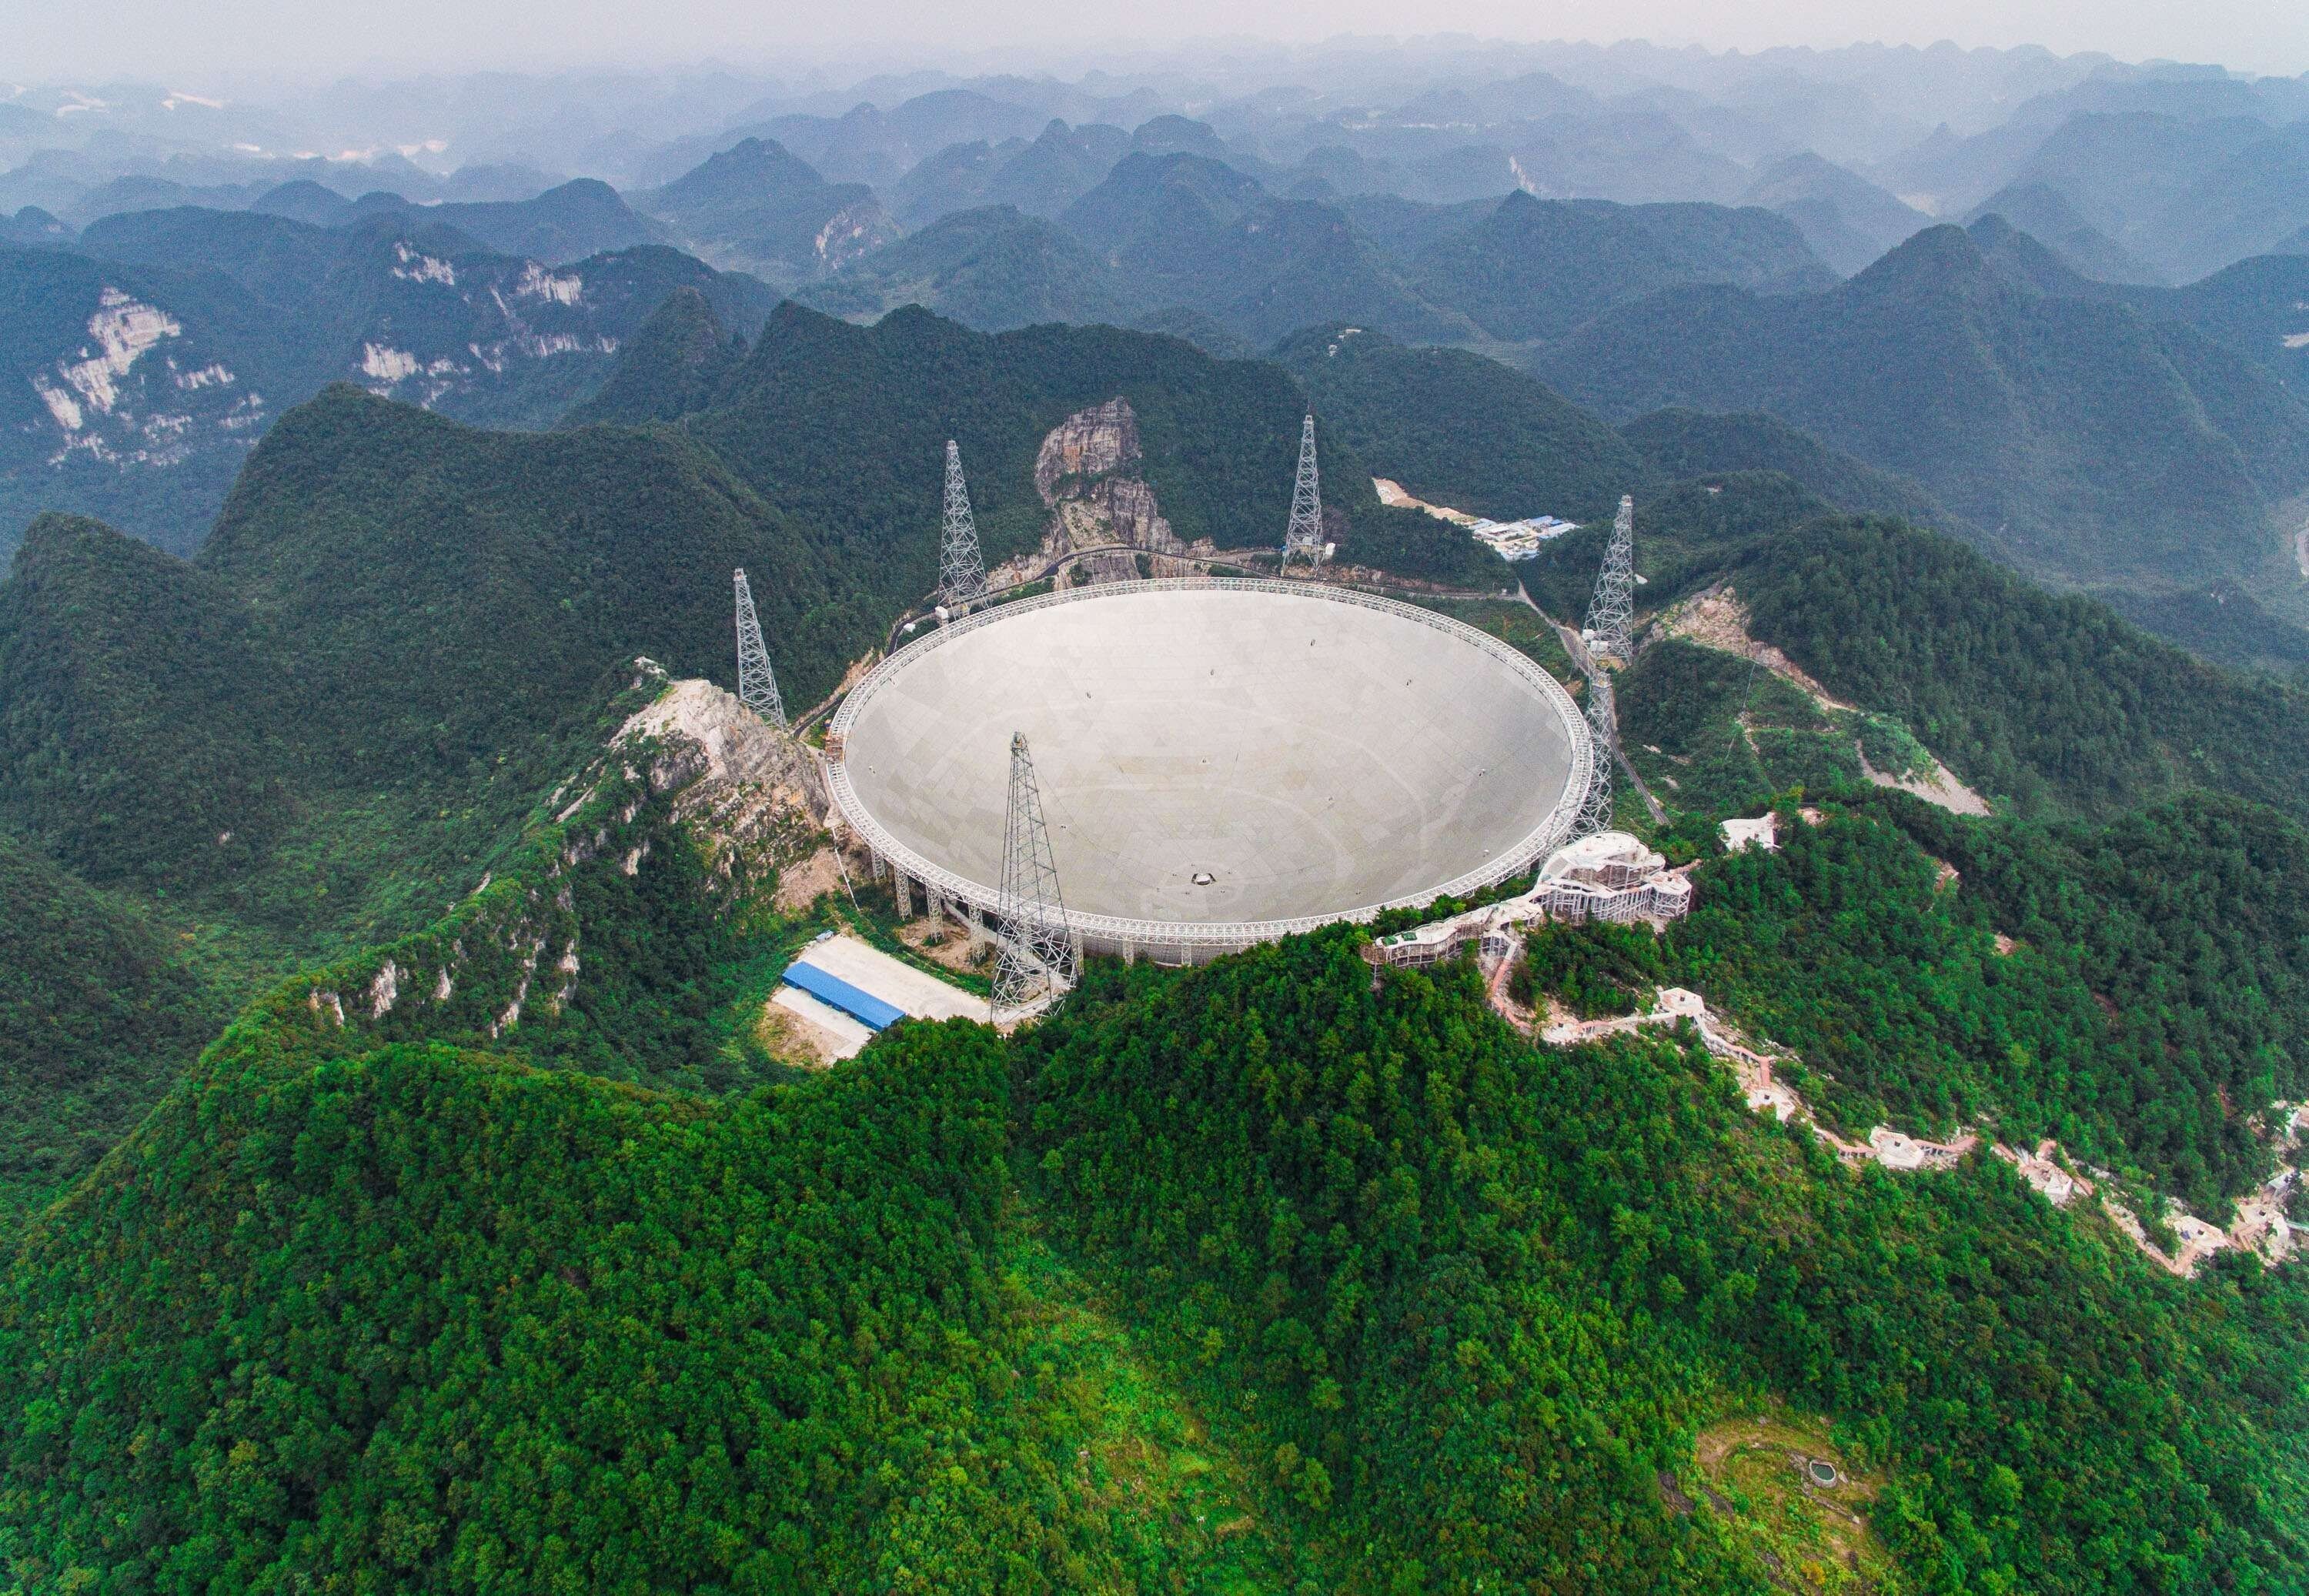 The Five-hundred-metre Aperture Spherical Telescope, the world's largest full dish radio telescope known as FAST, is located in Pingtang County, in southwest China’s Guizhou province. Photo: Xinhua